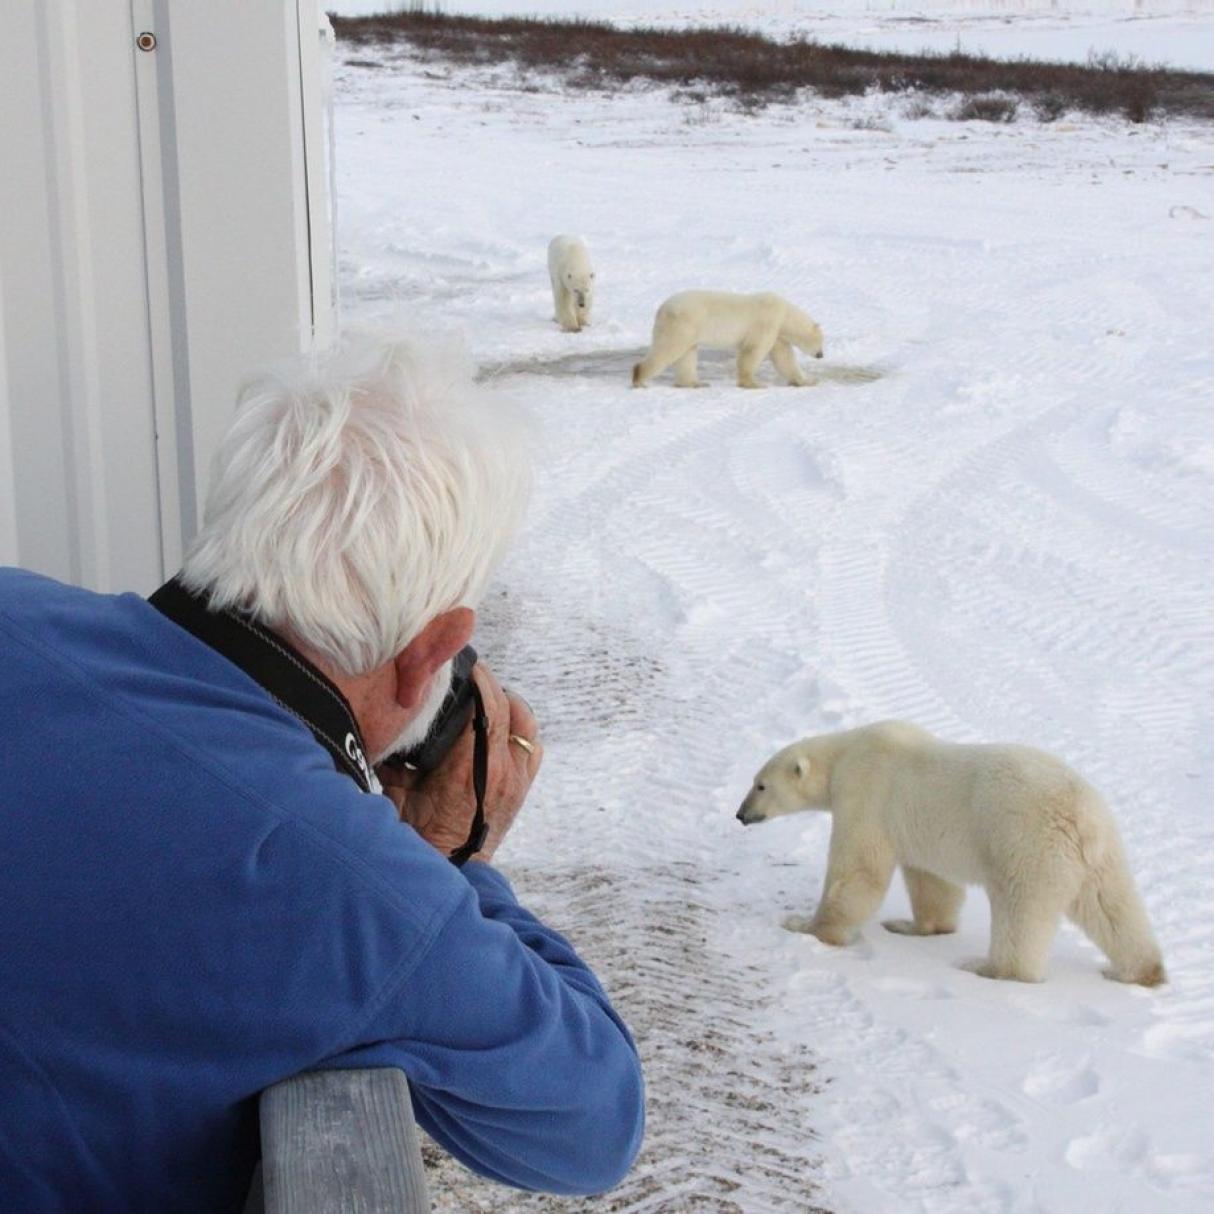 A person with grey hair wearing a blue sweater holds a camera up to take photos of three nearby polar bears walking through the snow.